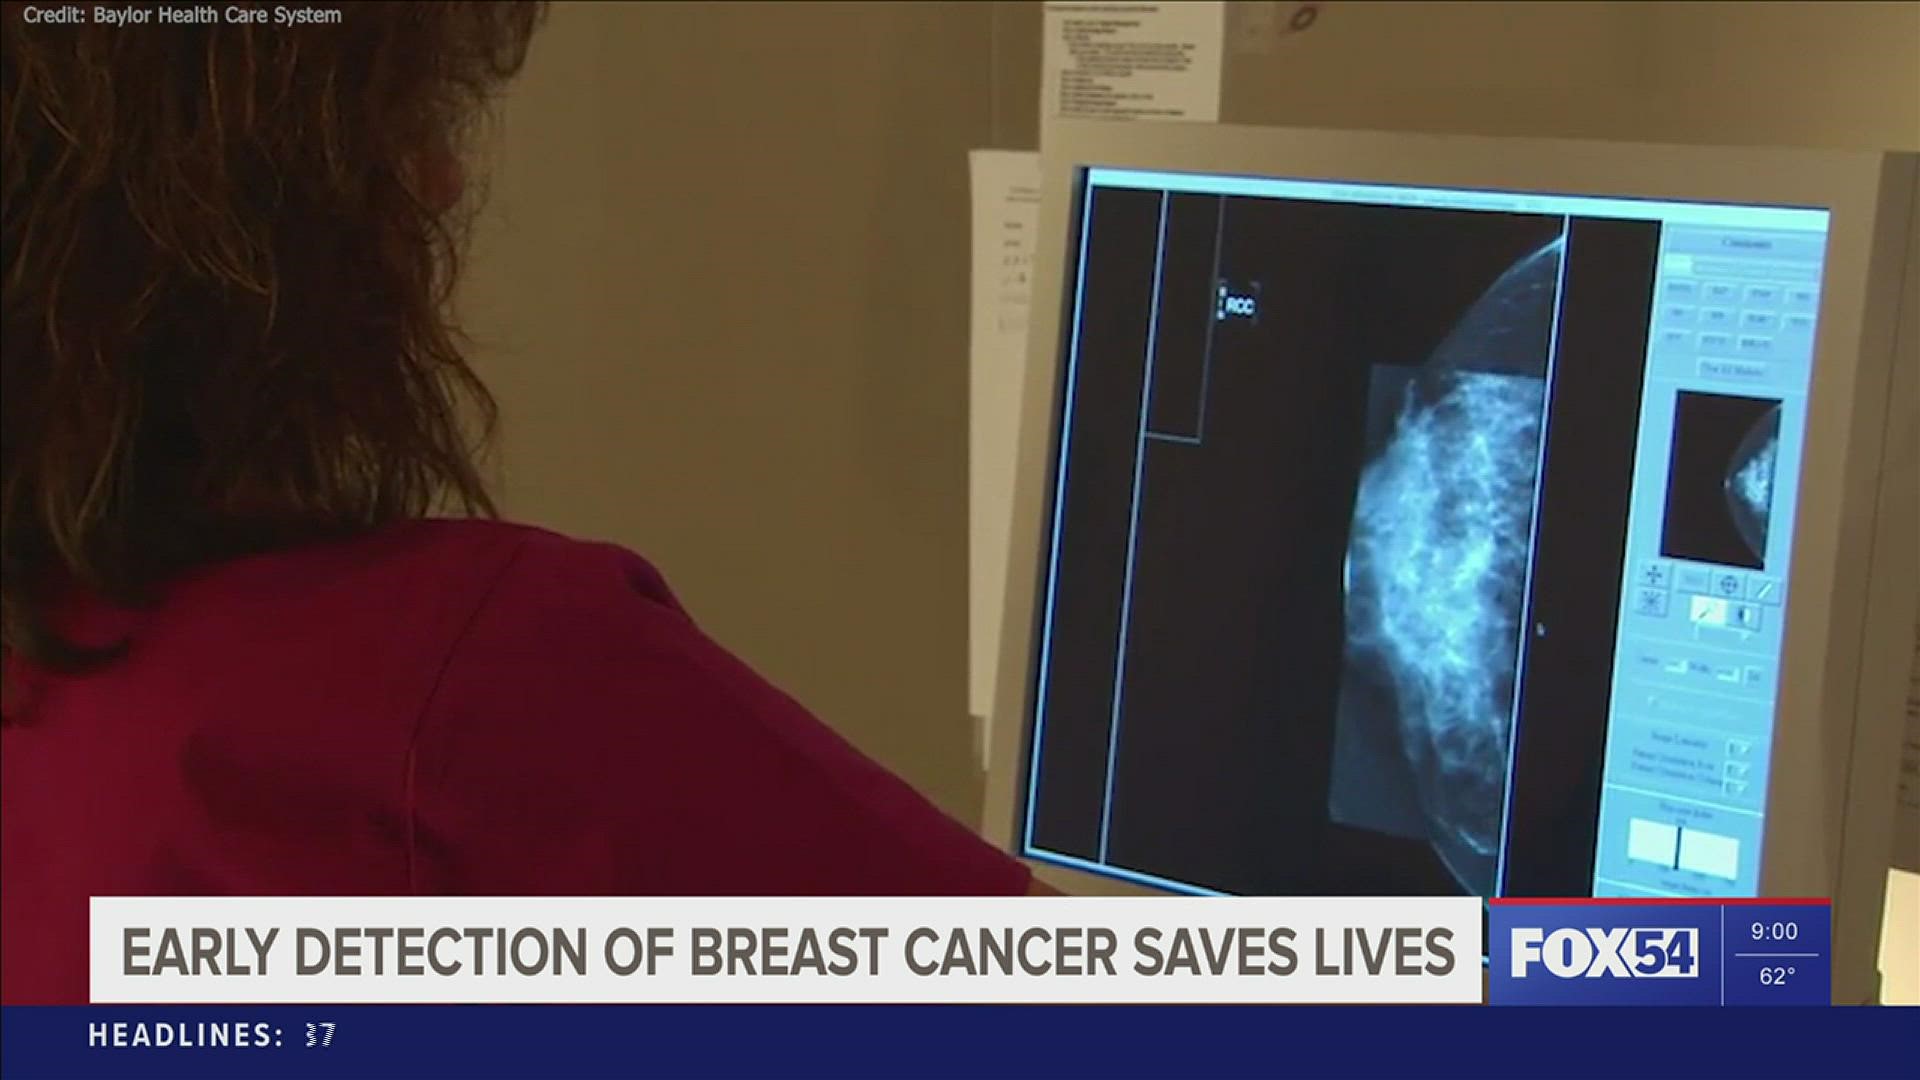 Self breast exams are an important first step in detecting breast cancer.